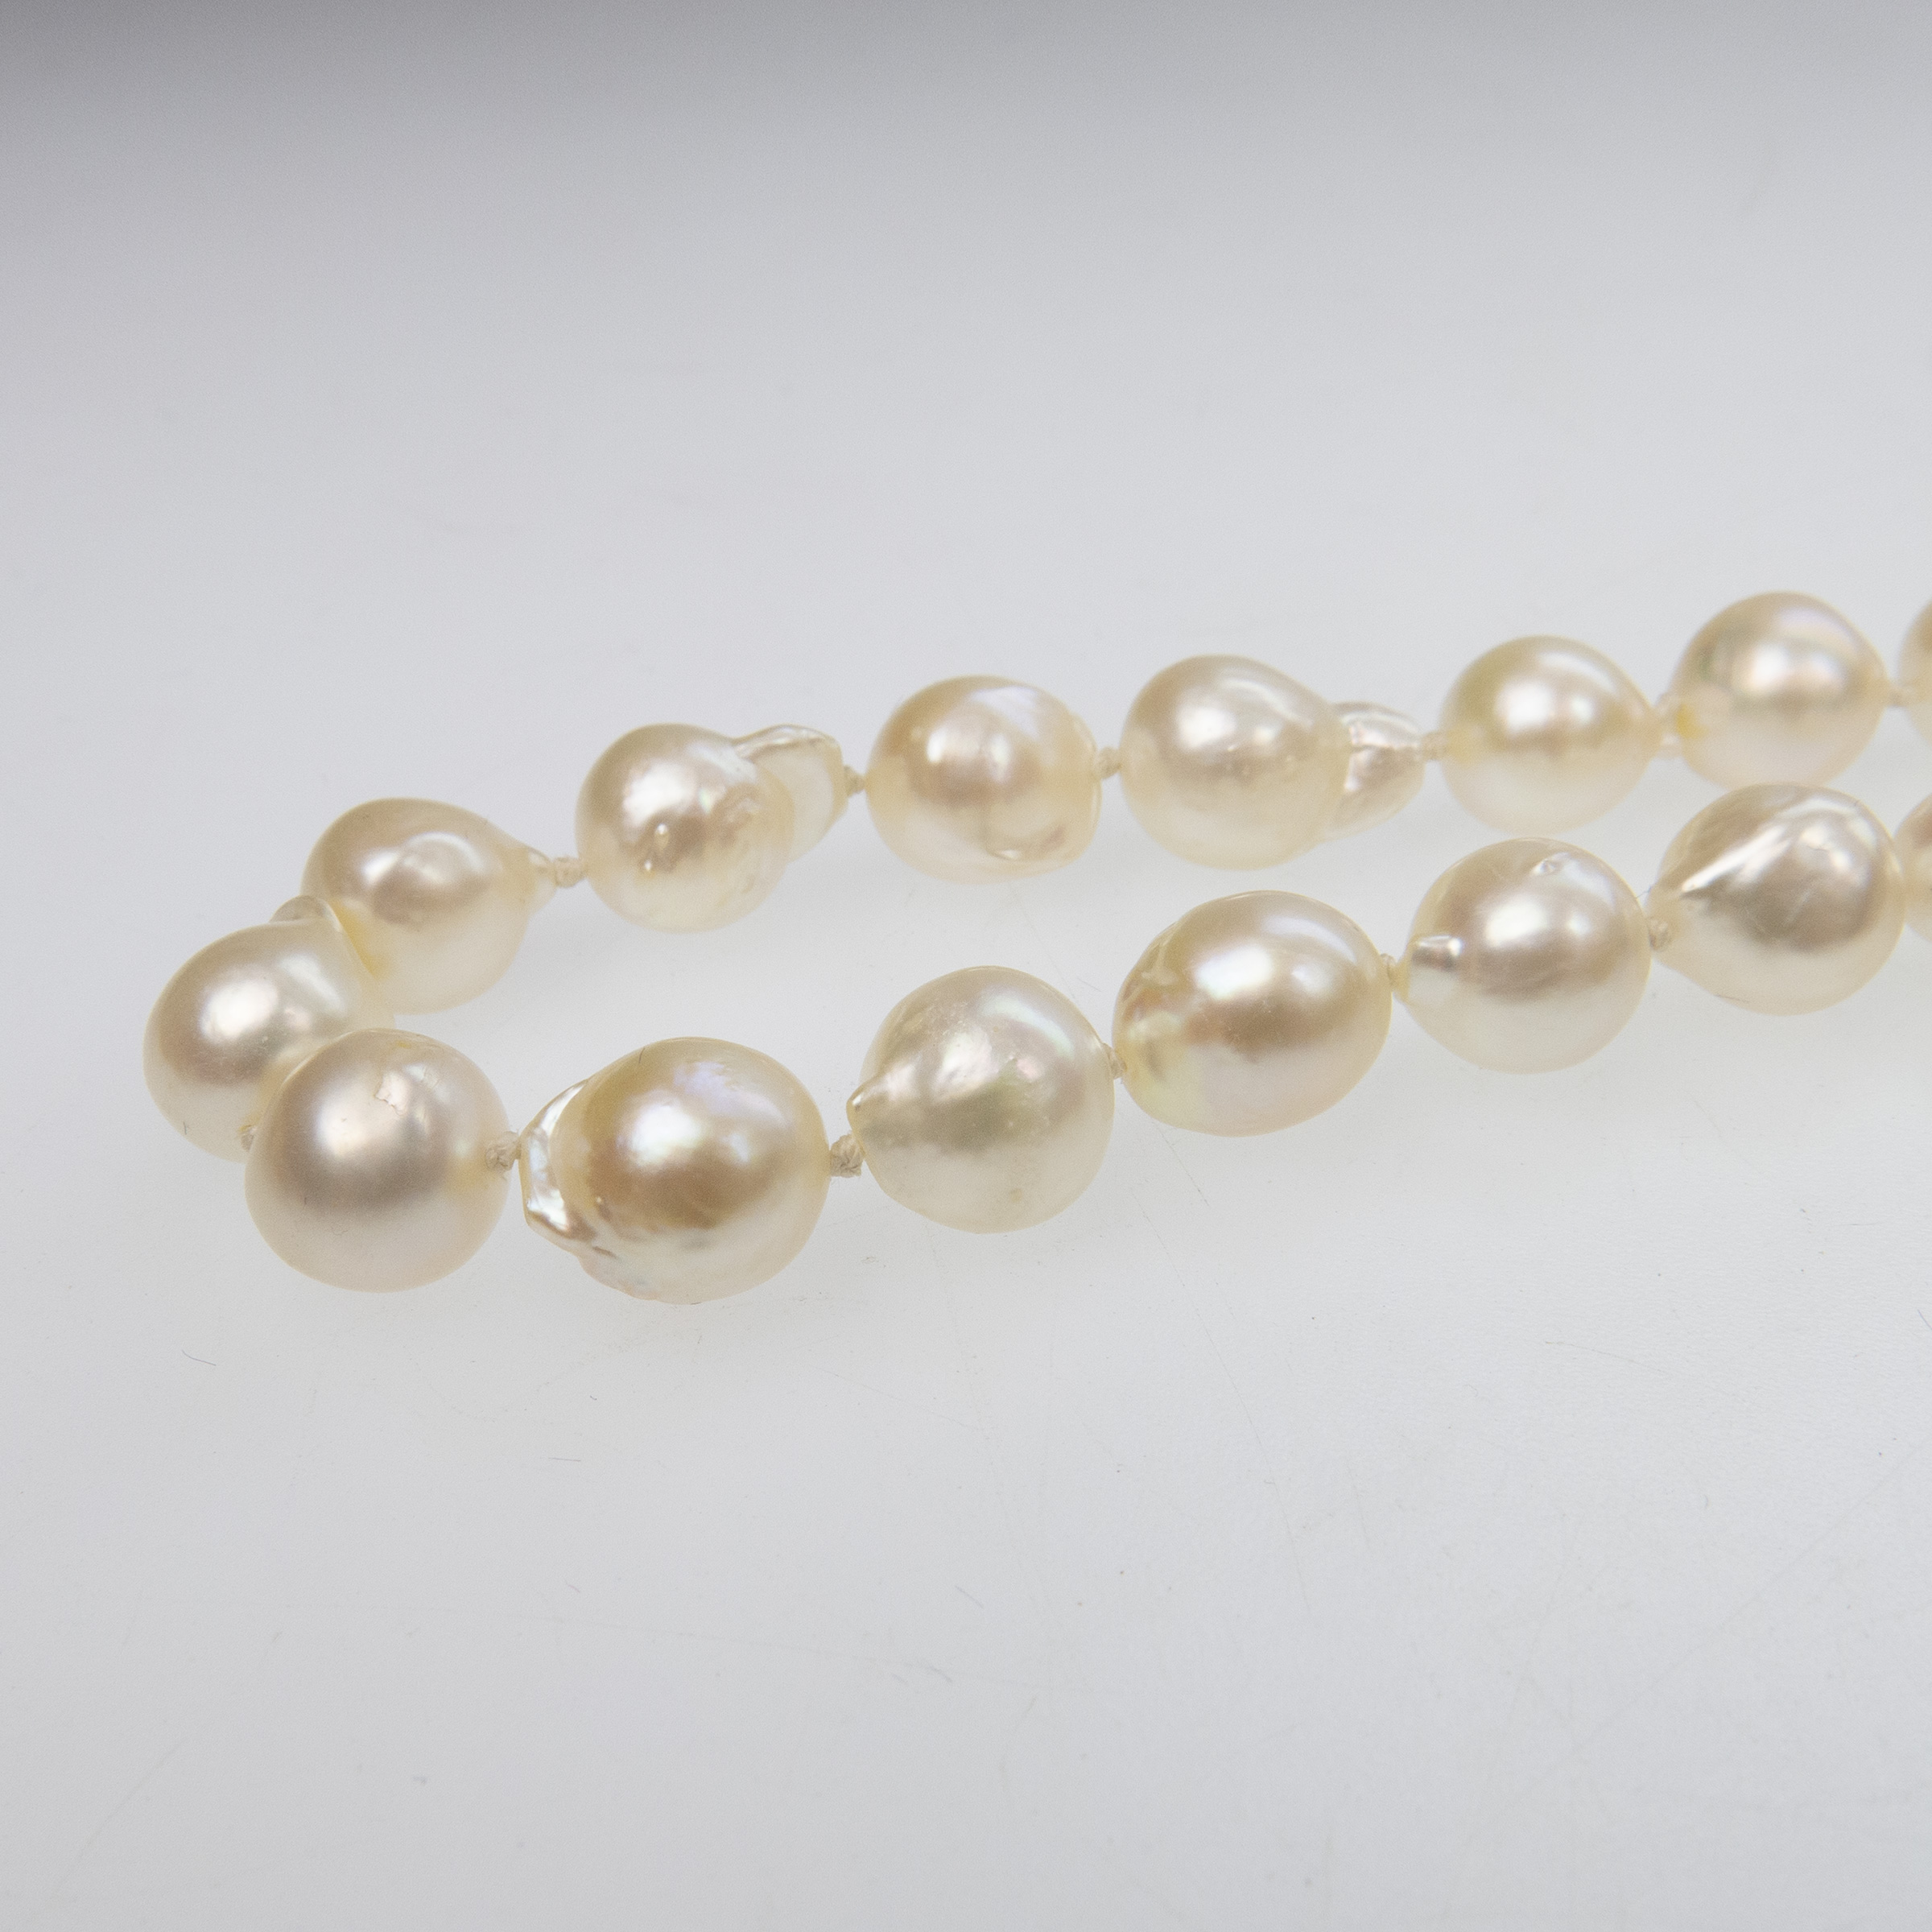 Single Strand Of Baroque Cultured Pearls